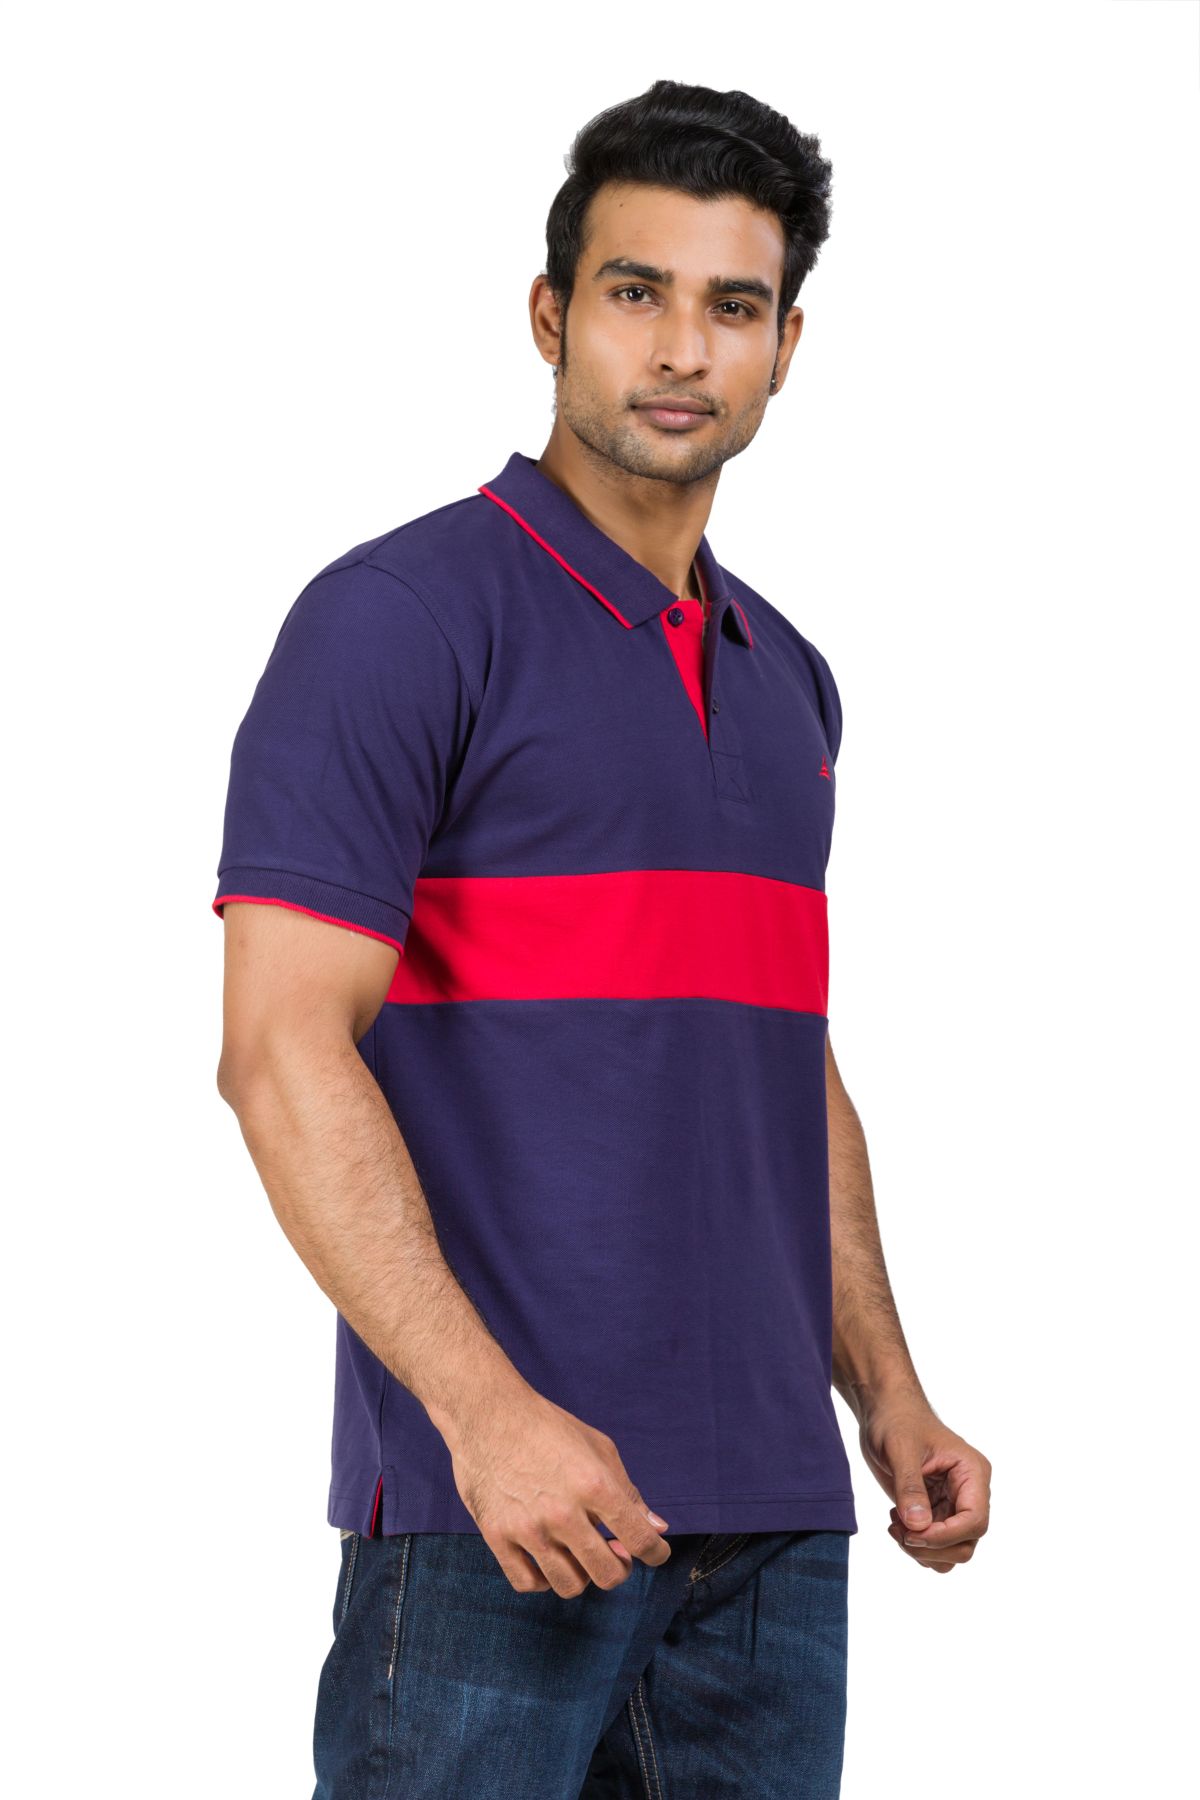 Cotton Blend Polo T-shirt Navy-Red For Men